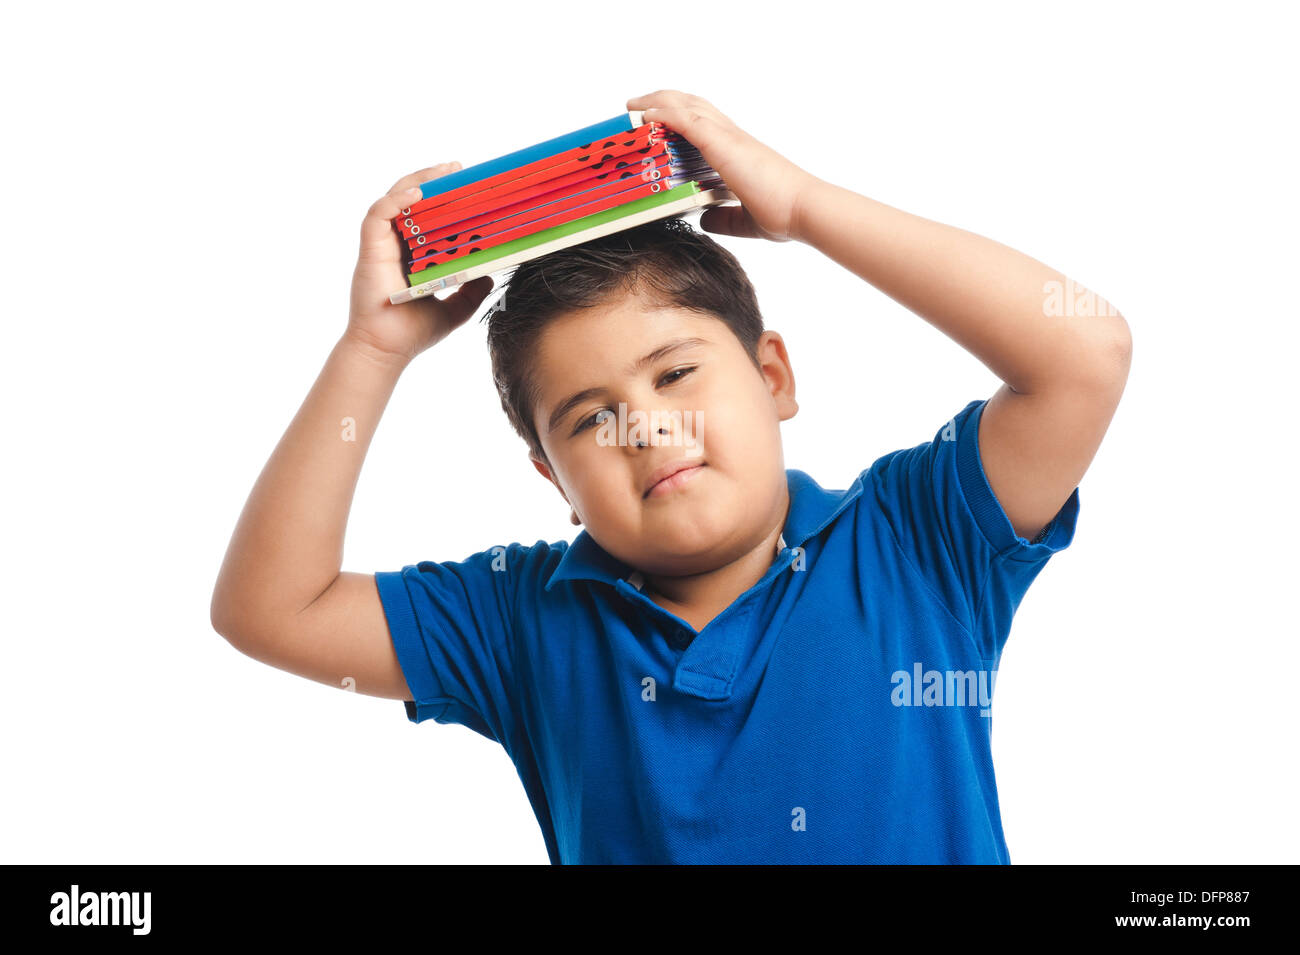 Boy holding a stack of books over his head Stock Photo